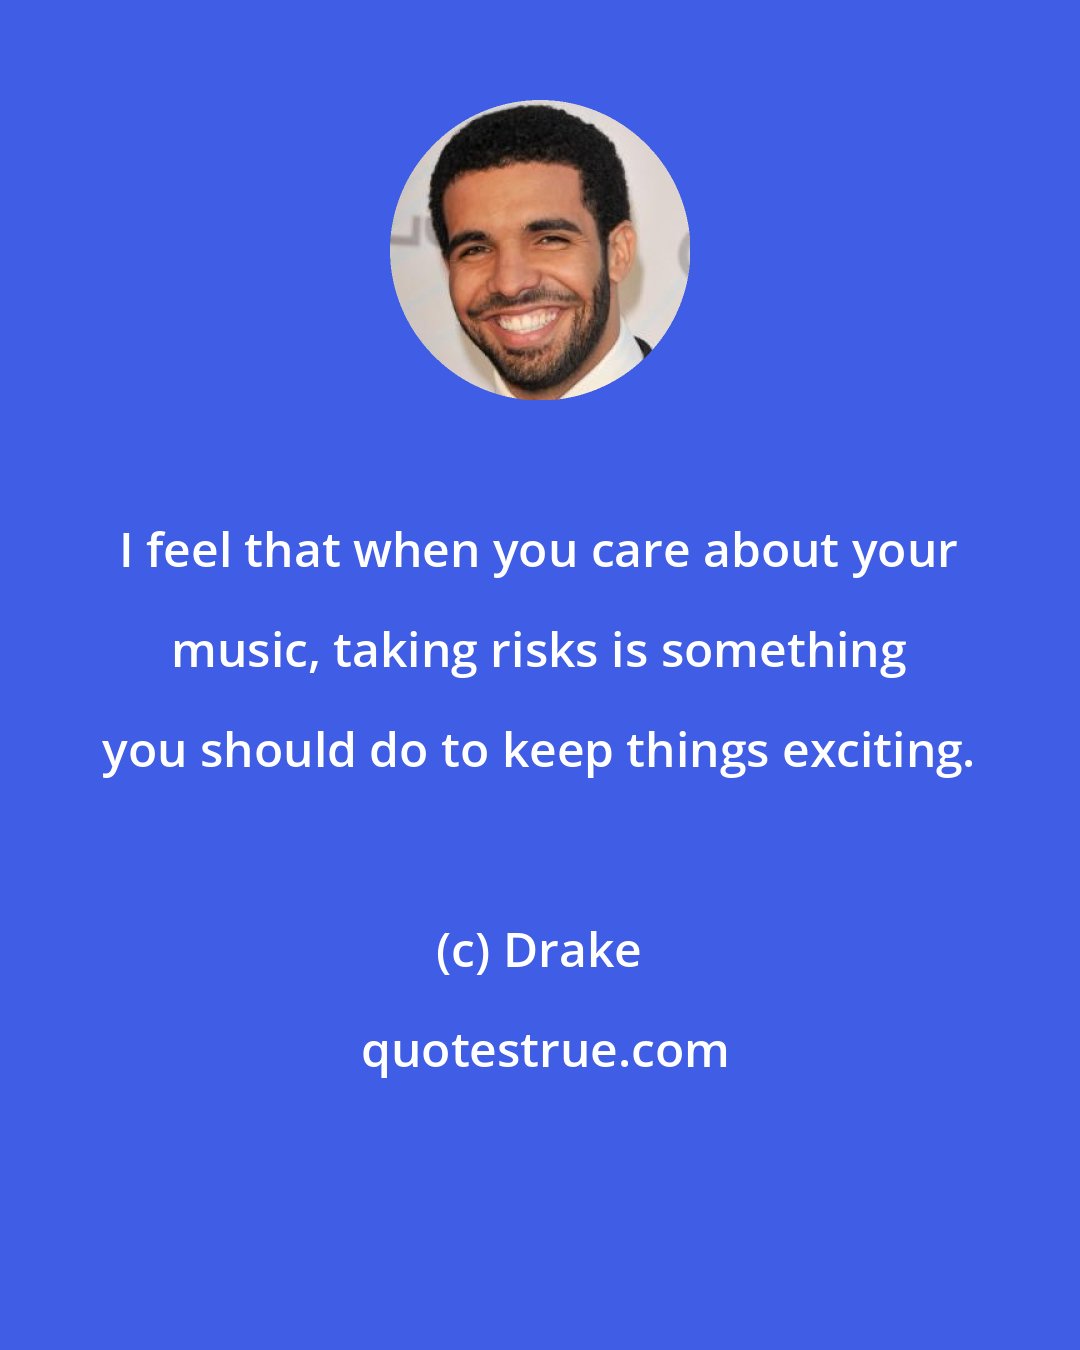 Drake: I feel that when you care about your music, taking risks is something you should do to keep things exciting.